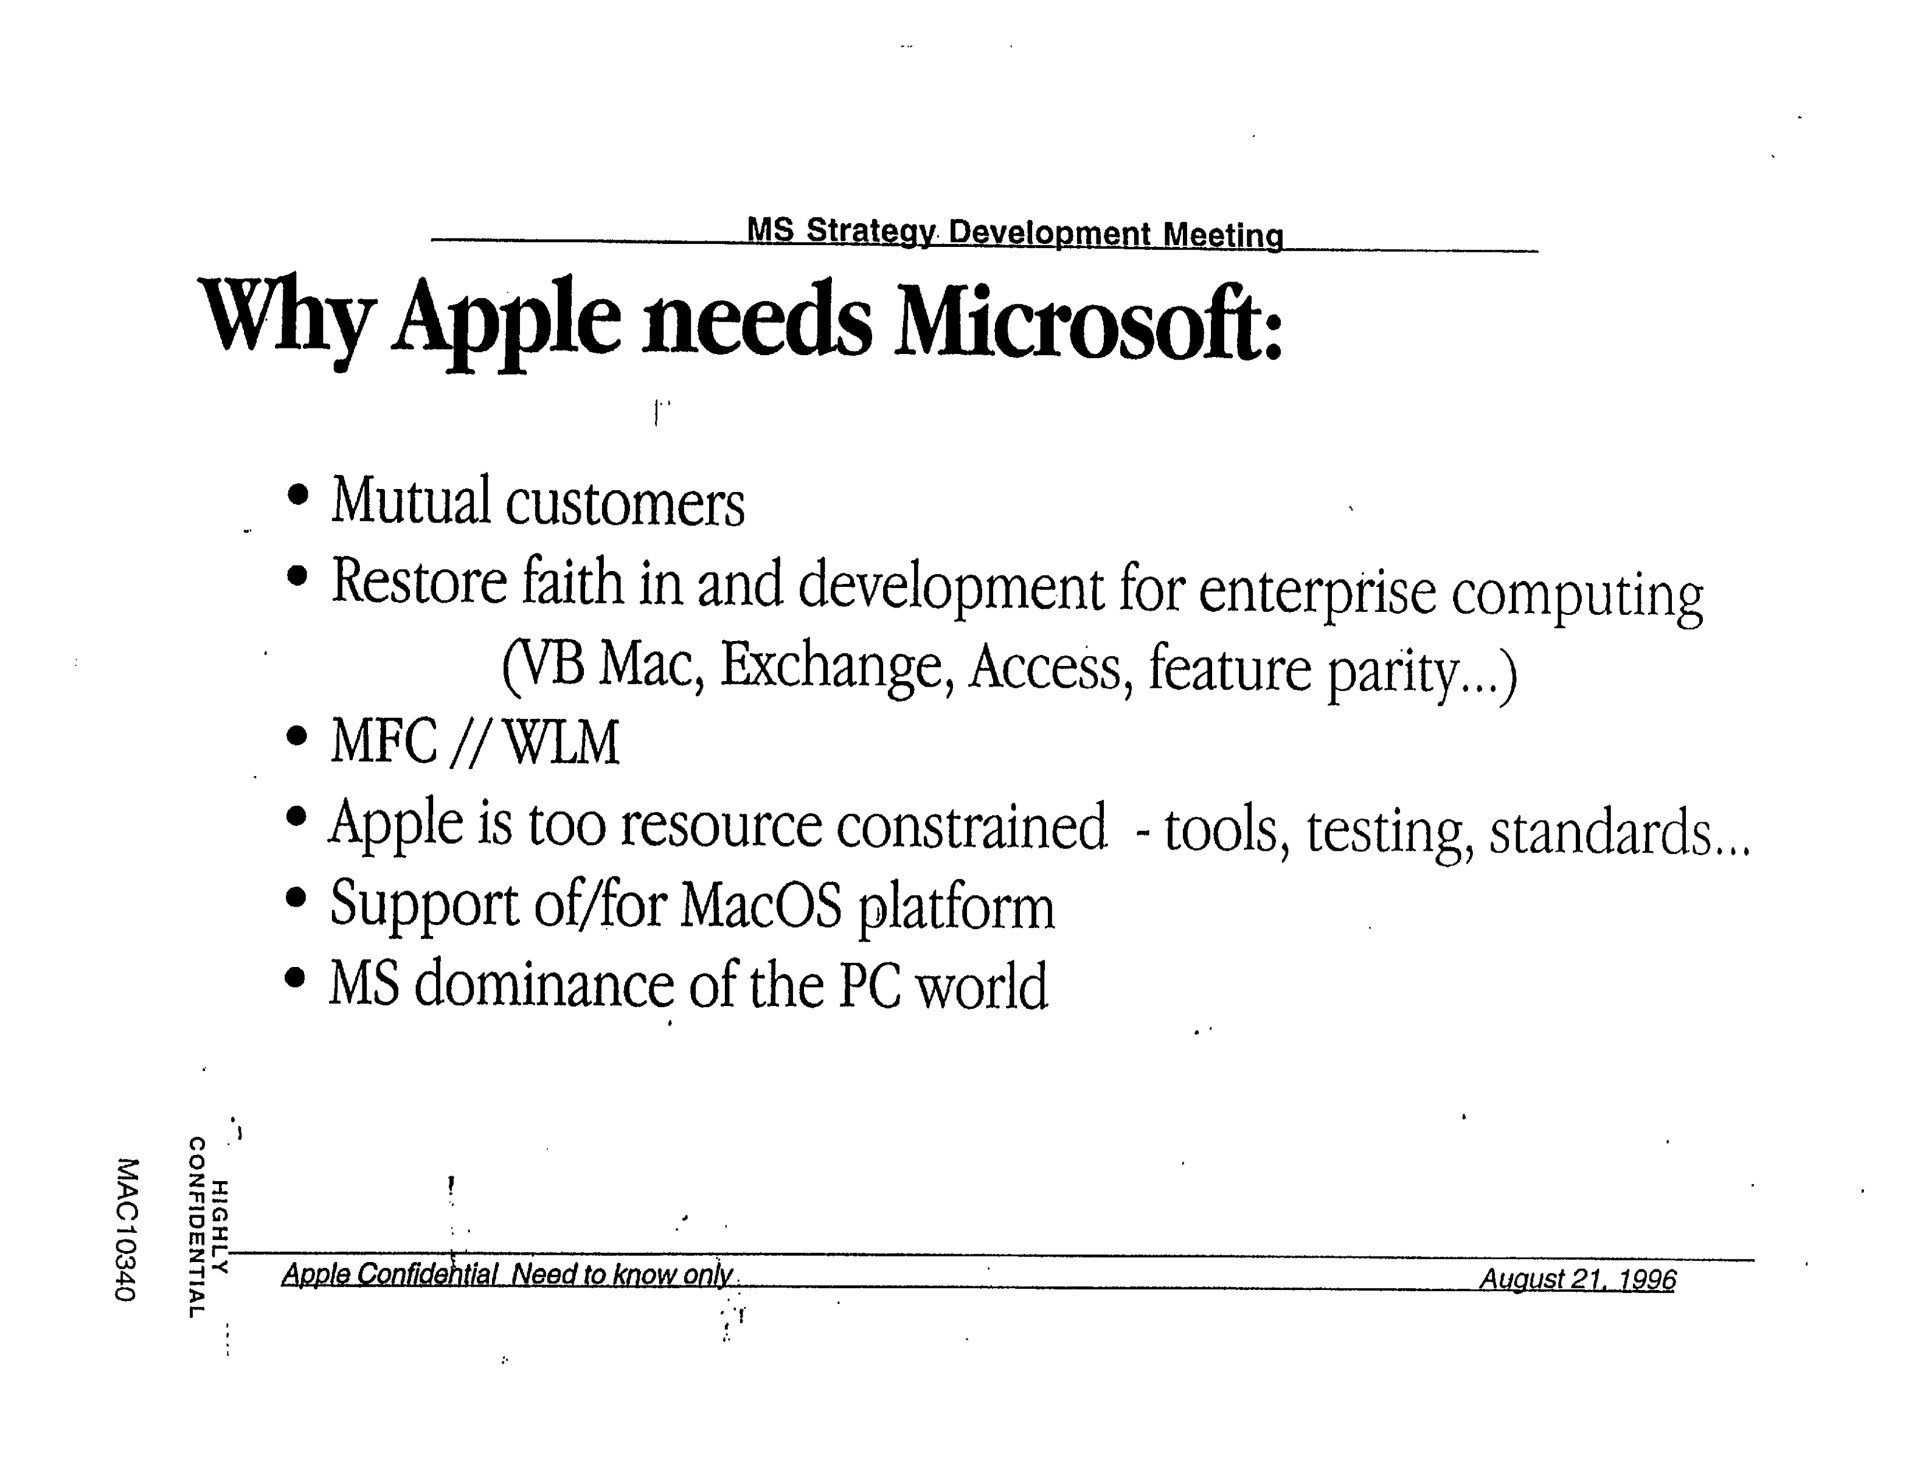 why apple needs mutual customers restore faith in and development for enterprise computing mac exchange access feature parity wim apple is too resource constrained tools testing standards support of for platform dominance of the world | Apple